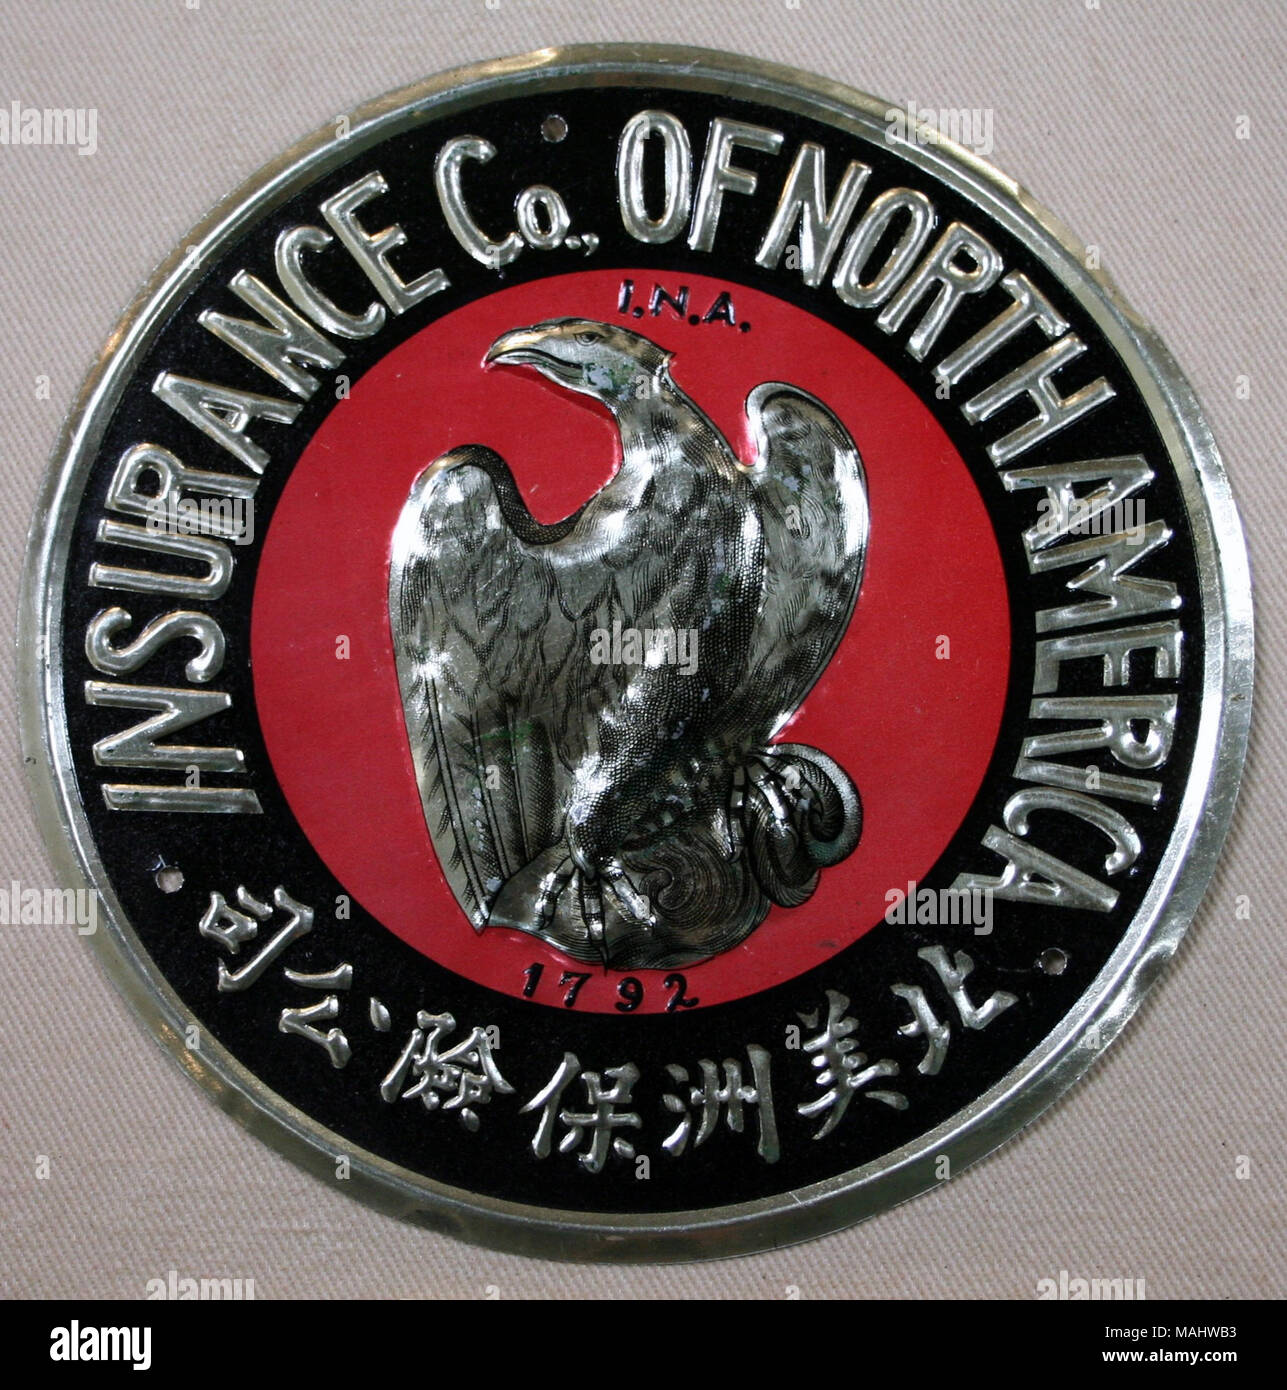 Pressed tin fire mark for Insurance Company of North America in Philadelphia, Pennsylvania shows raised gold eagle on red center with company name and foreign characters around border Title: Fire mark for Insurance Company of North America in Philadelphia, Pennsylvania  . after 1920. Stock Photo